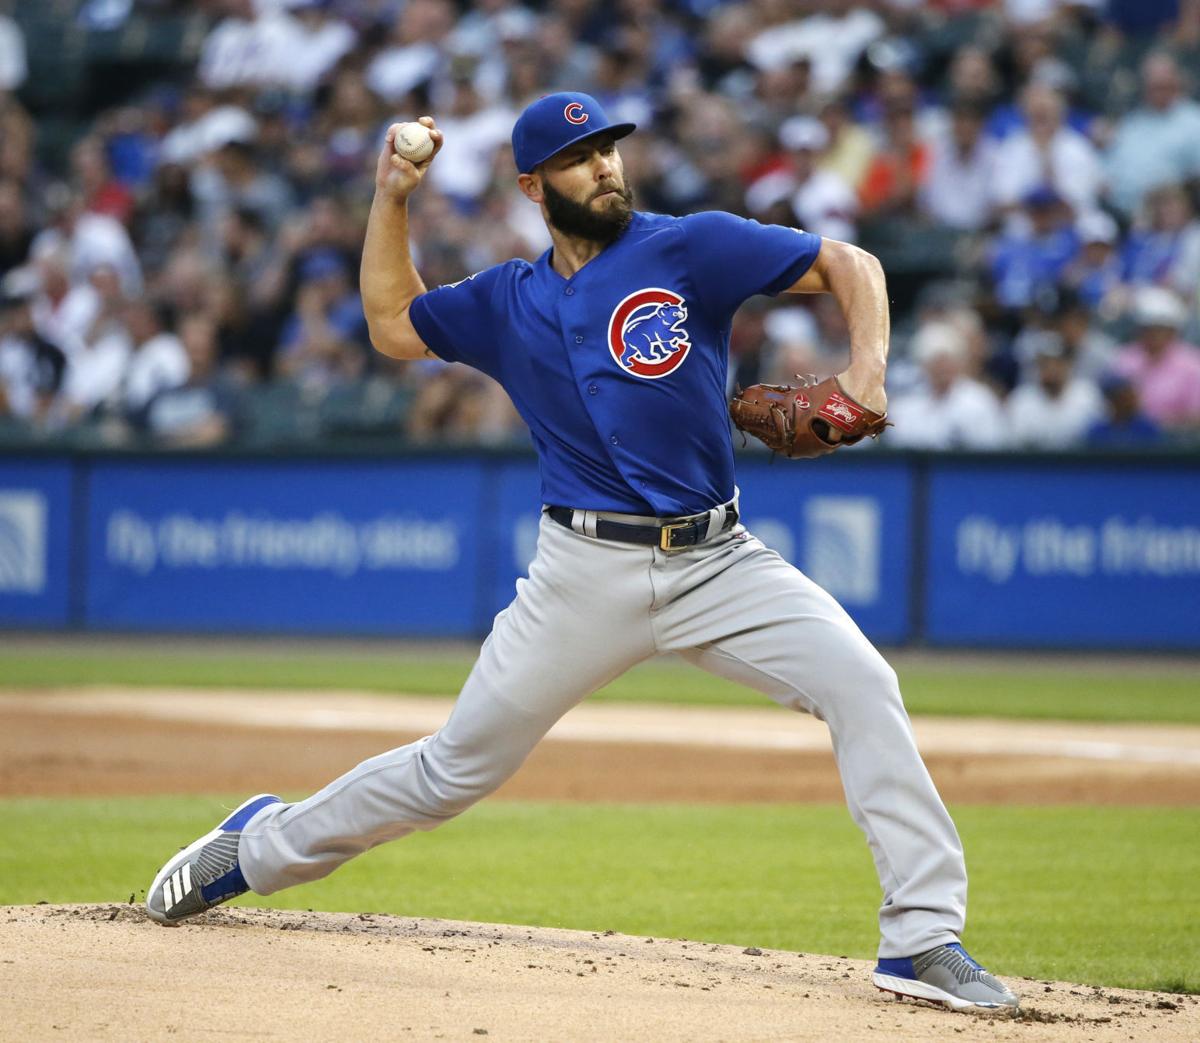 Jake Arrieta: Chicago Cubs pitcher eyes for season debut